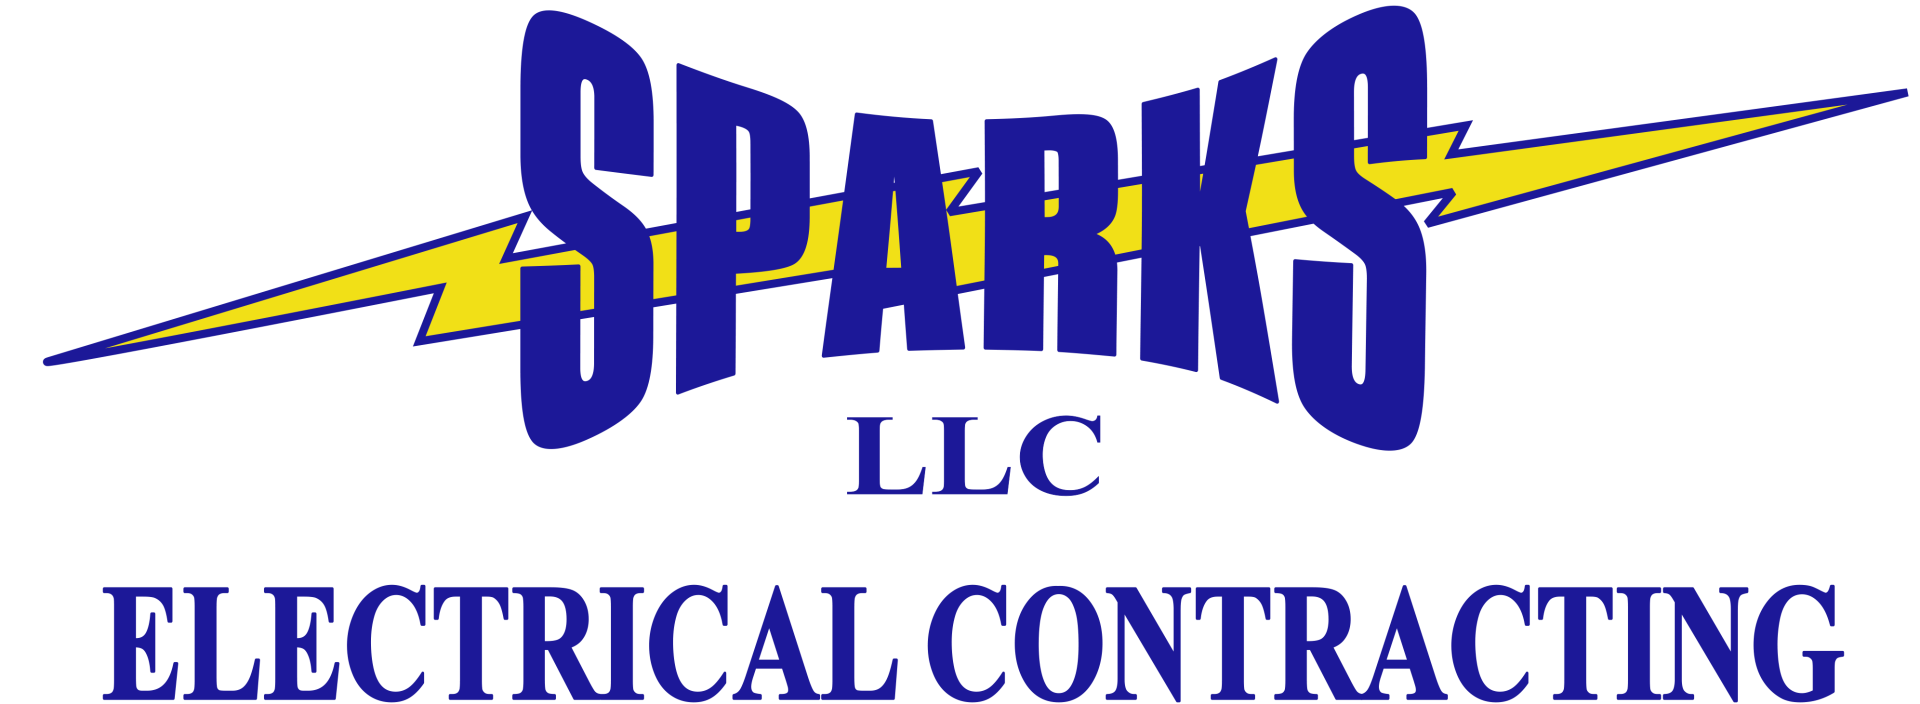 Sparks Electrical Contracting logo